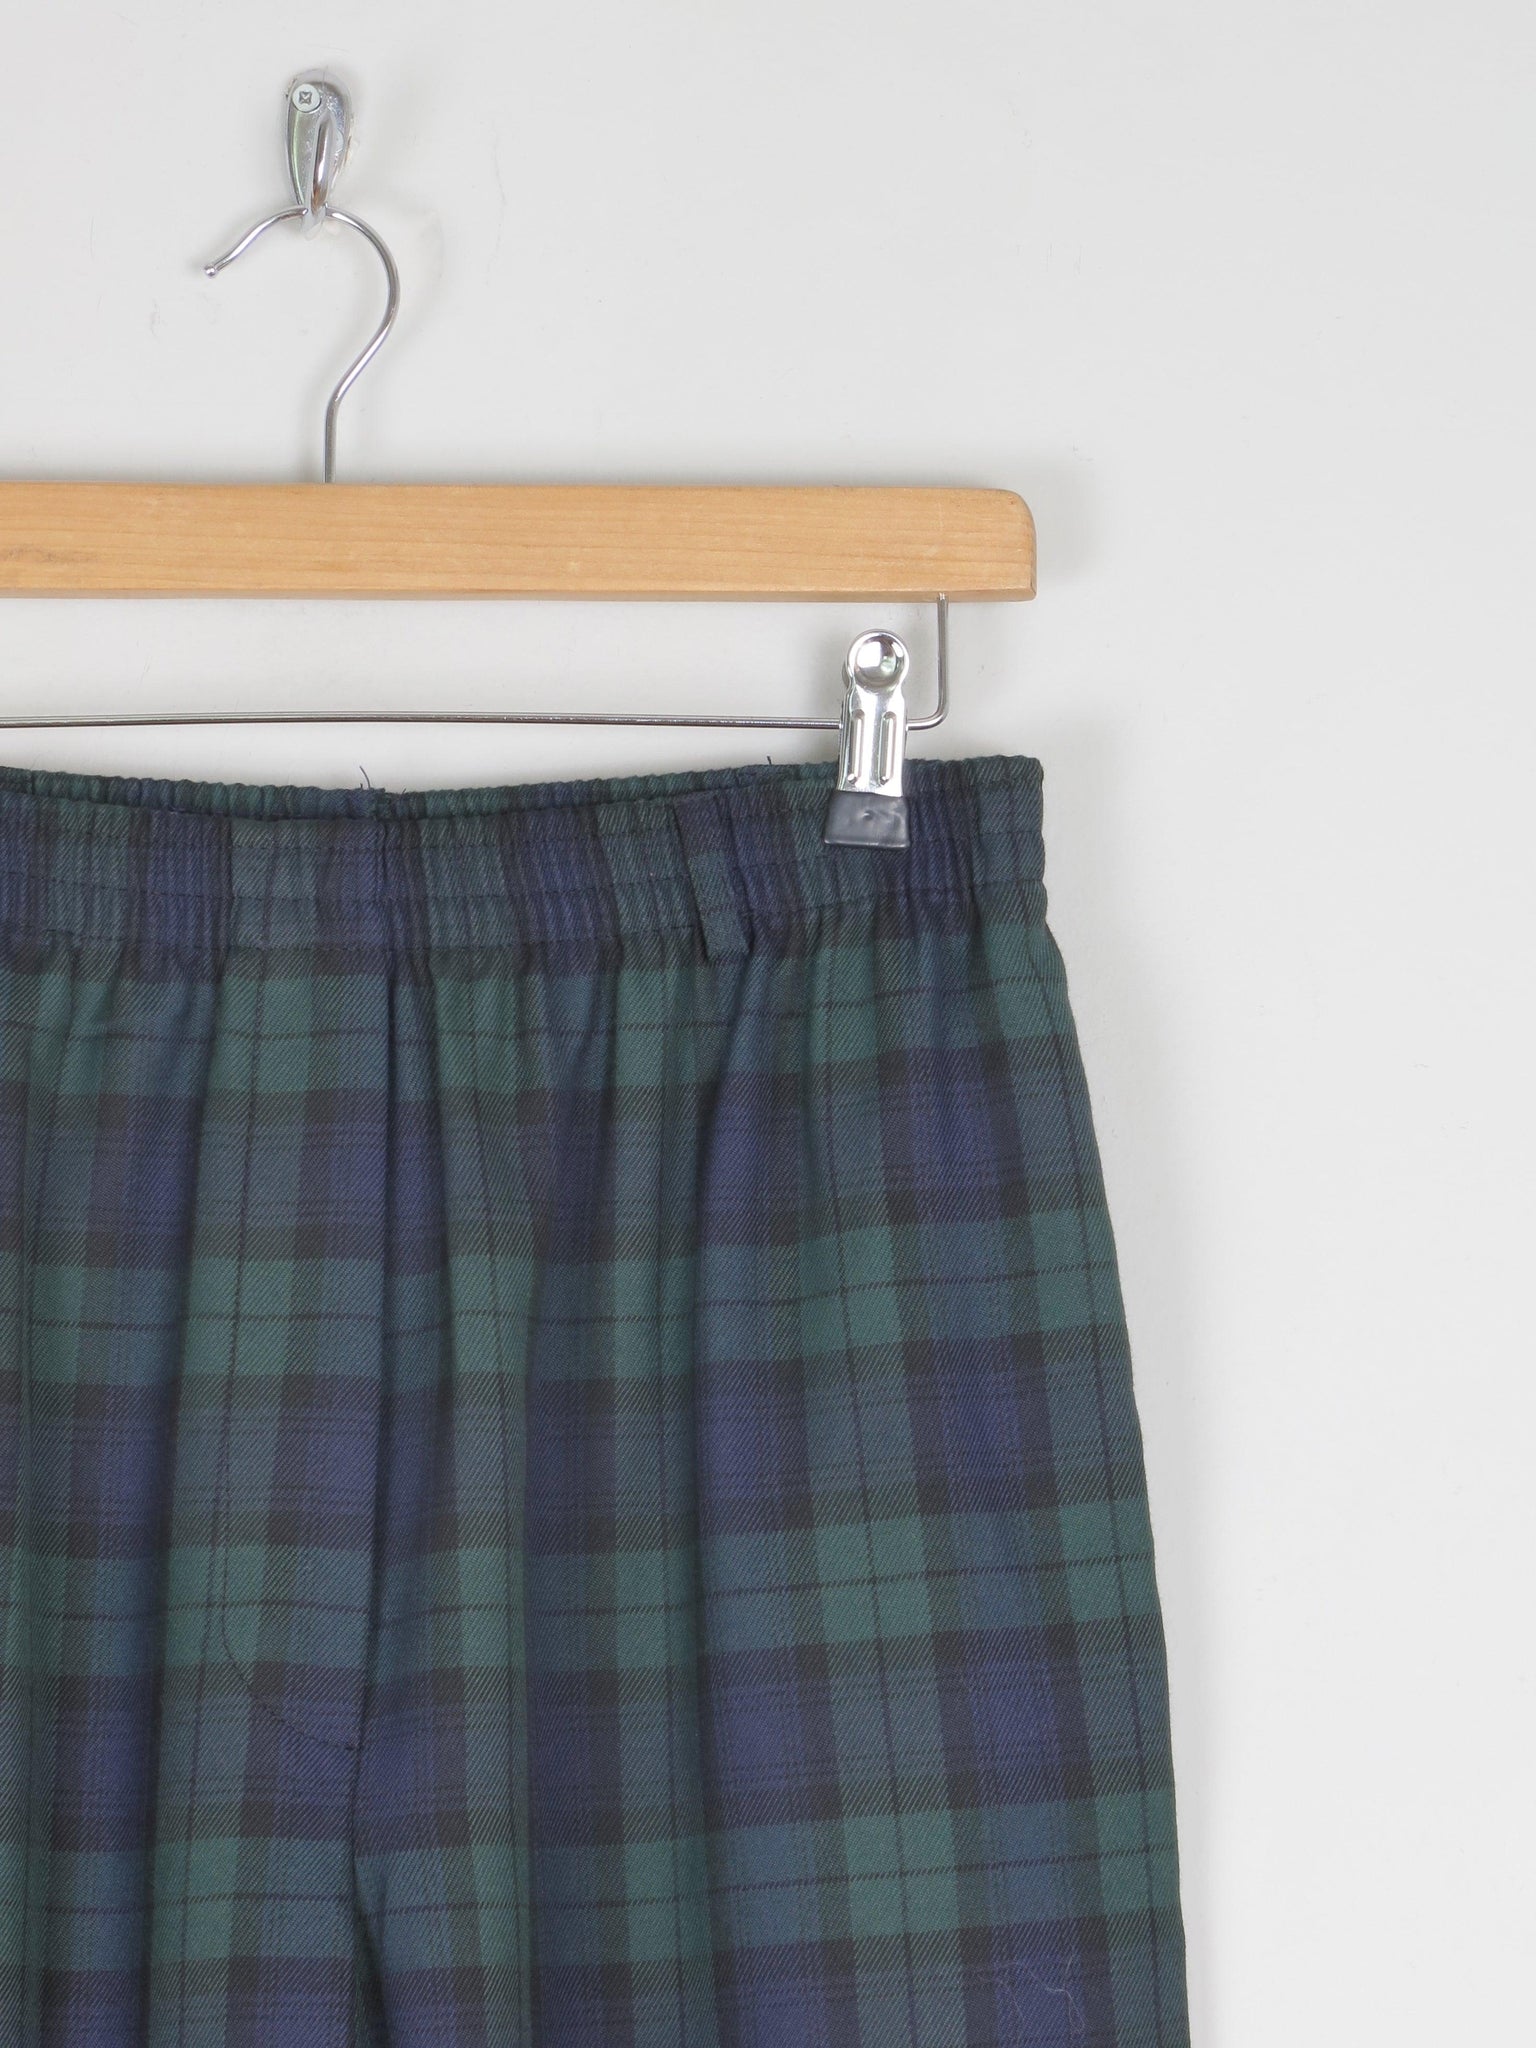 Women's Green & Navy Check Tartan Vintage Trousers 28-30 - The Harlequin